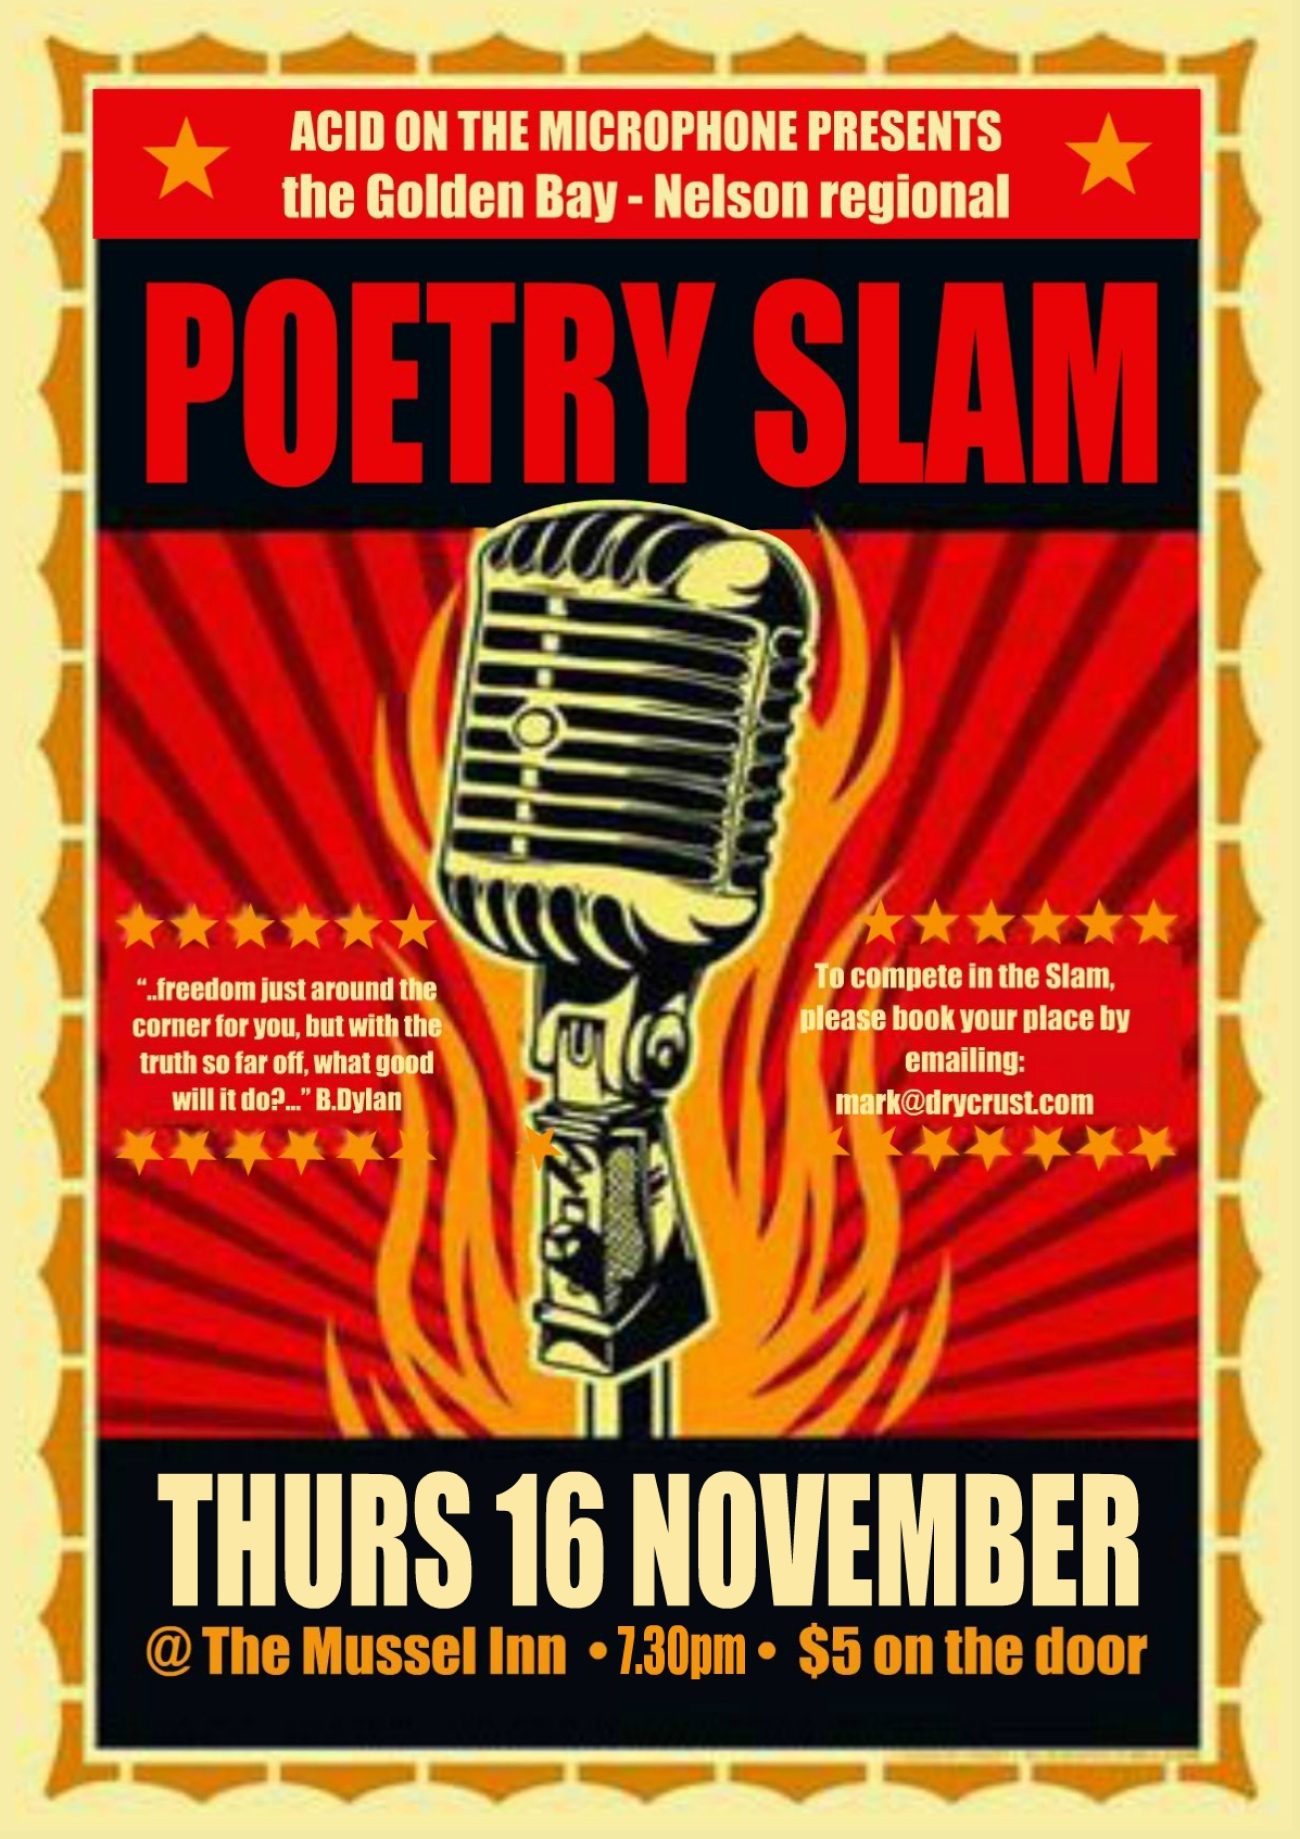 THE POETRY SLAM IS ON!